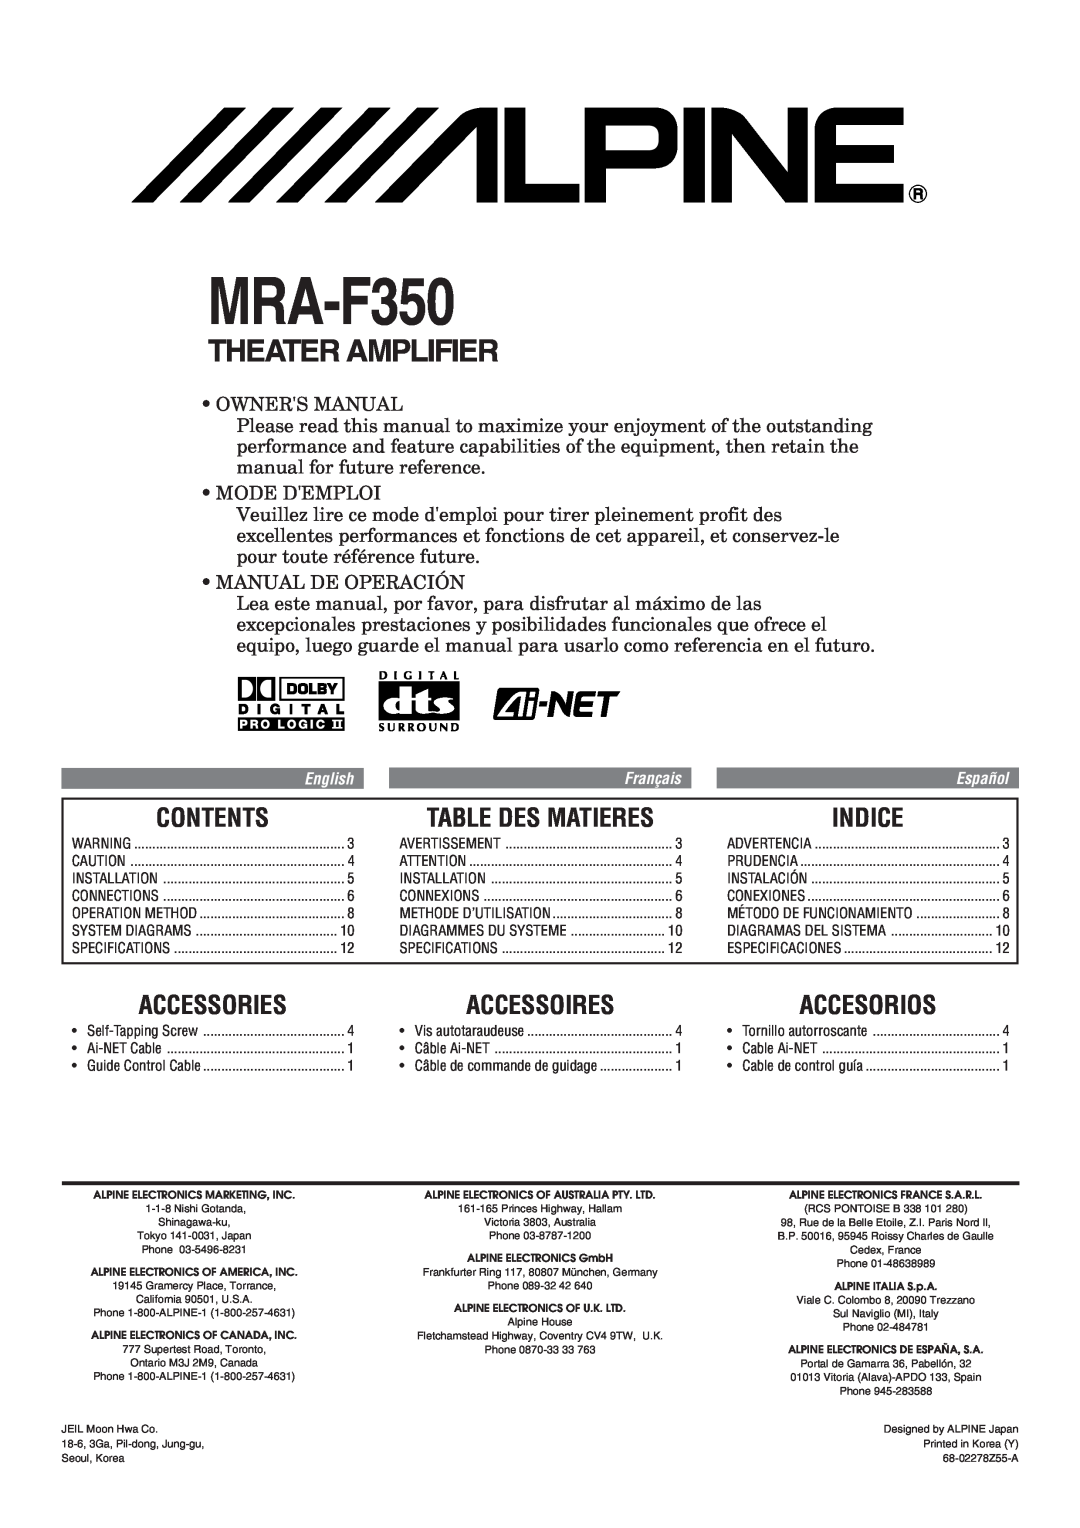 Alpine MRA-F350 owner manual Contents, Indice, Accessories, Accessoires, Table Des Matieres, Accesorios, Theater Amplifier 